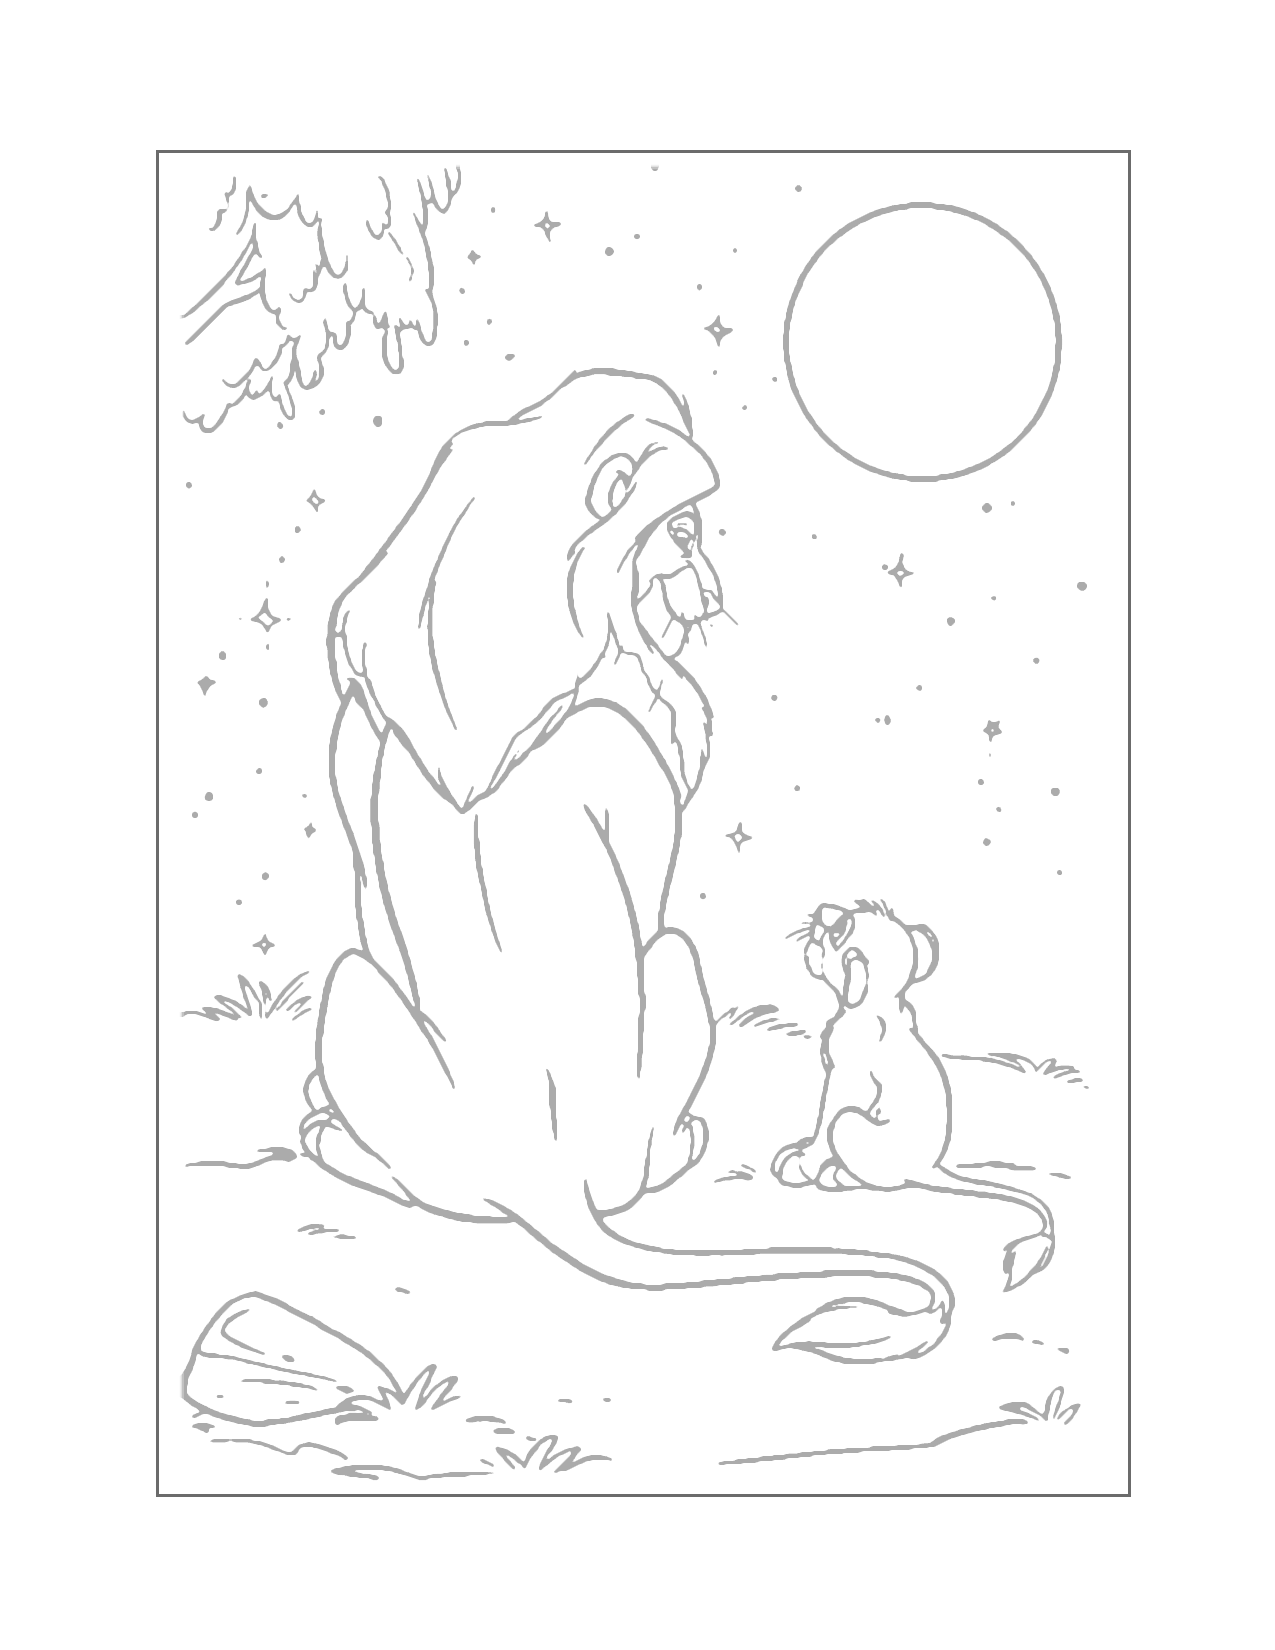 Mufasa Teaches Simba Traceable Coloring Page